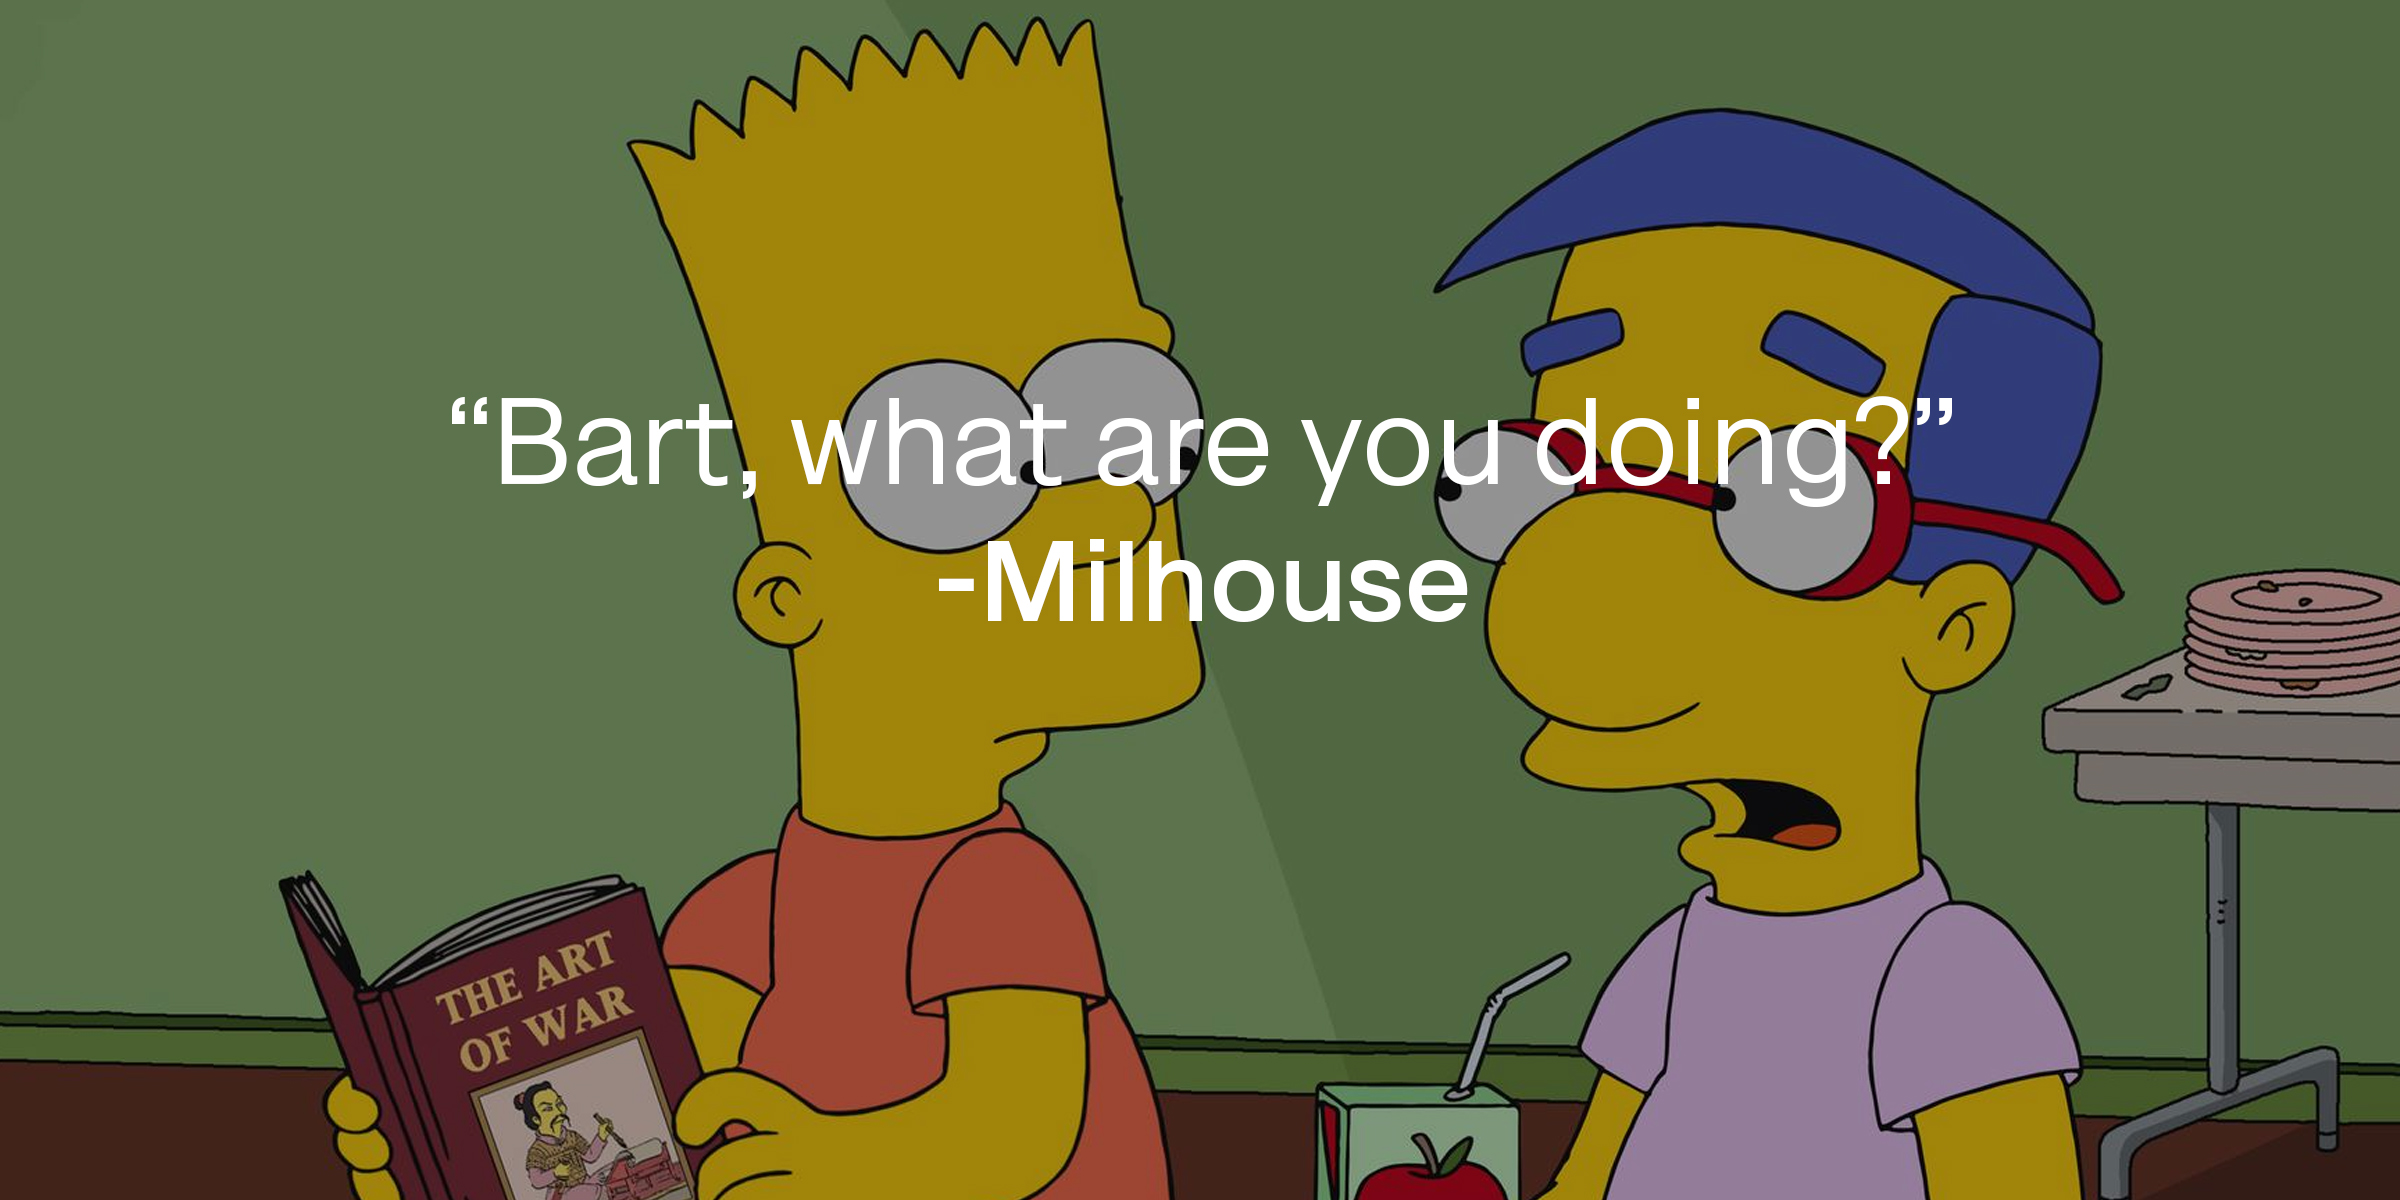 Bart Simpson and Milhouse, with Milhouse's quote: “Bart, what are you doing?” | Source: facebook.com/TheSimpsons